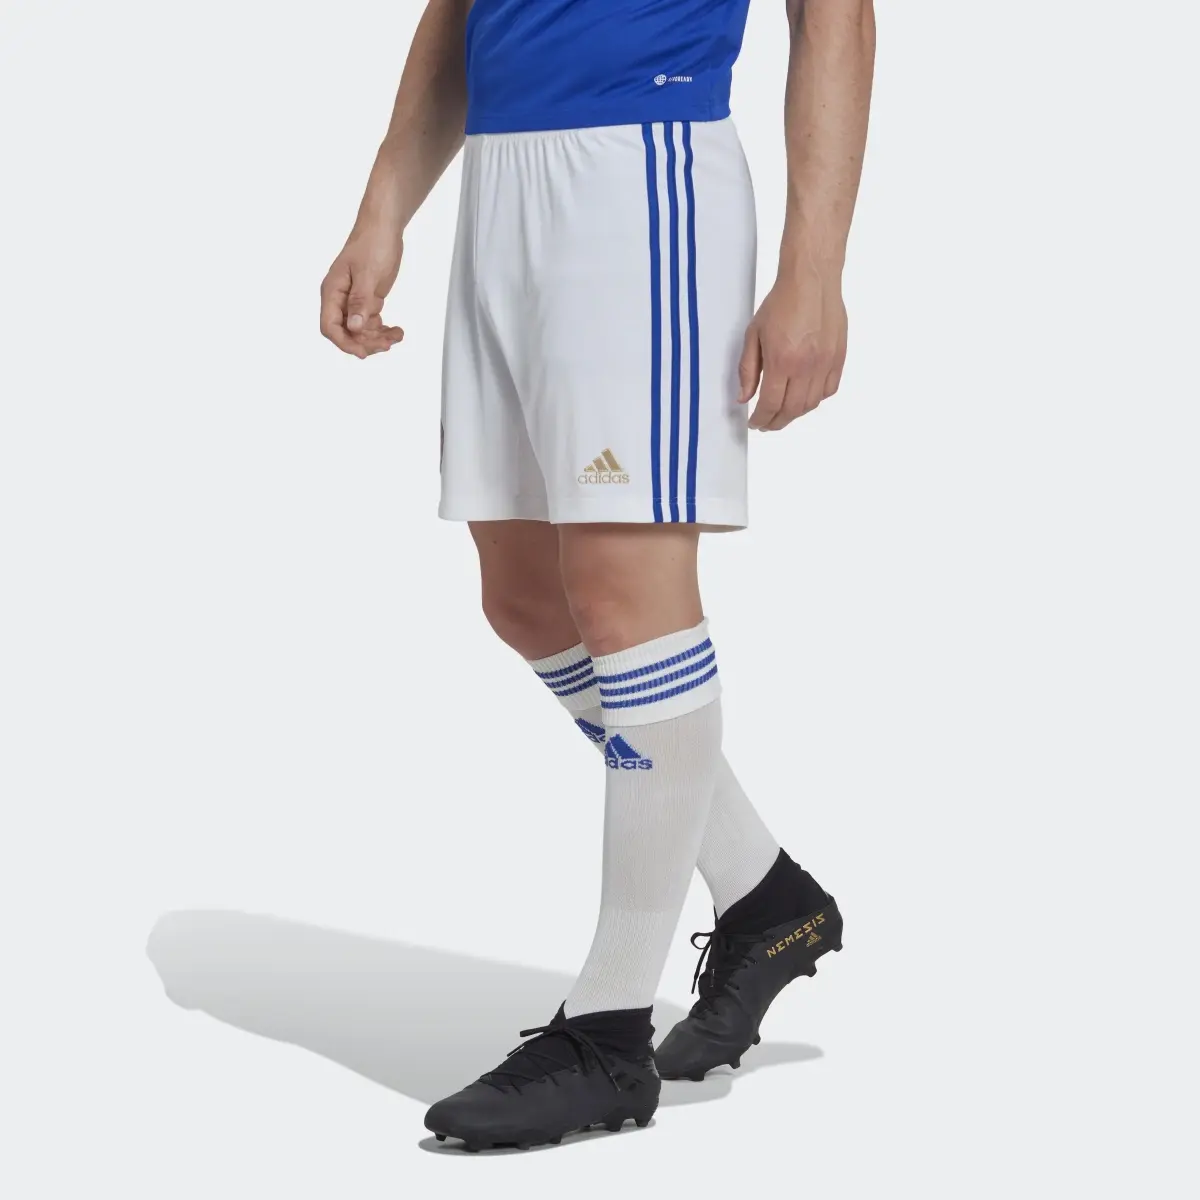 Adidas Short Home 22/23 Leicester City FC. 1